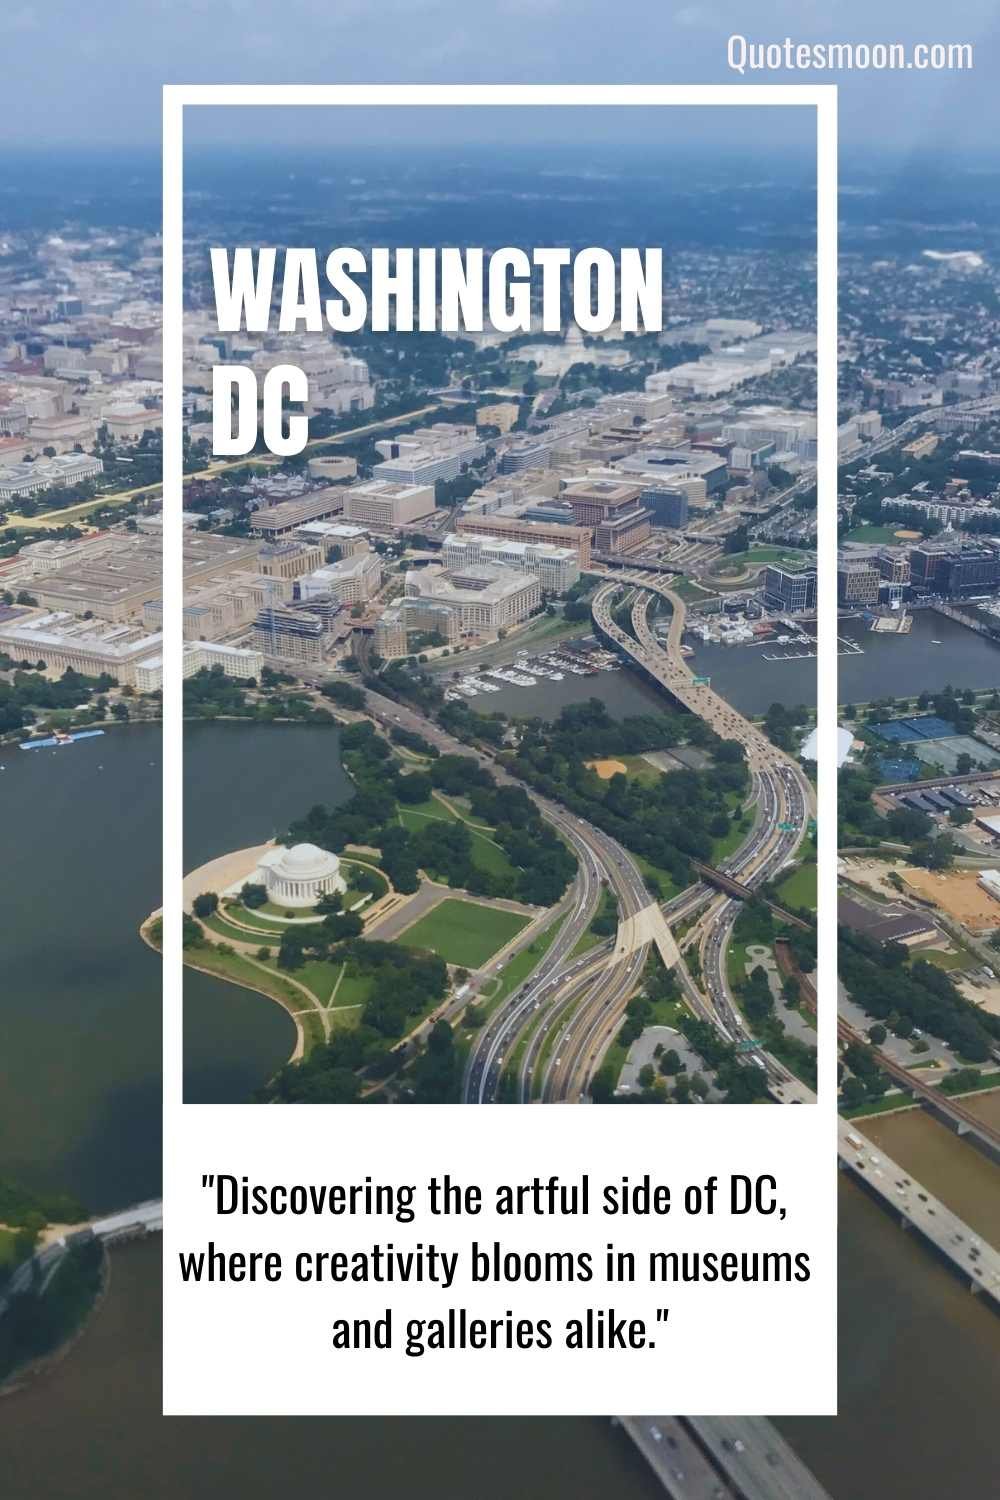 Inspirational & Beautiful Washington DC quotes with images HD